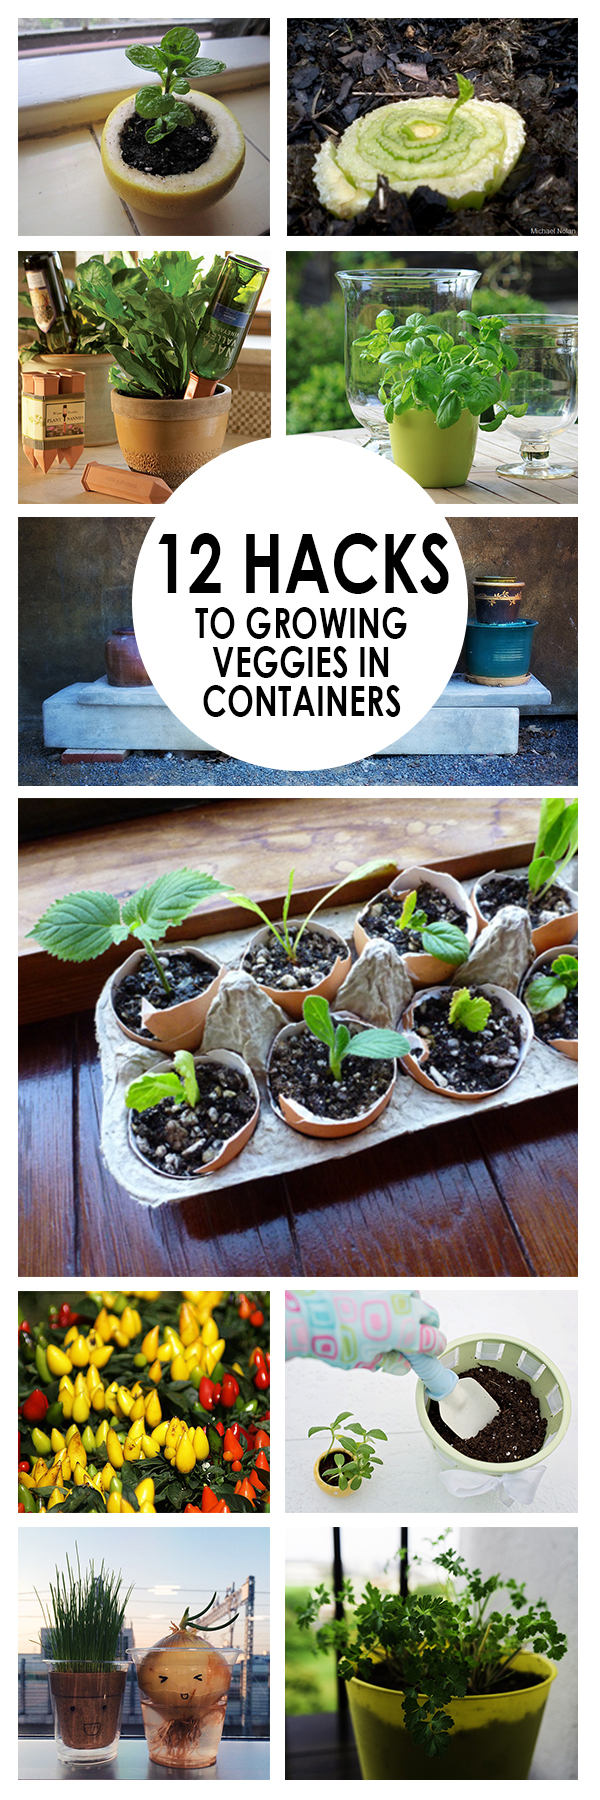 12 Gardening Hacks to Growing Veggies in Containers ~ Bees and Roses